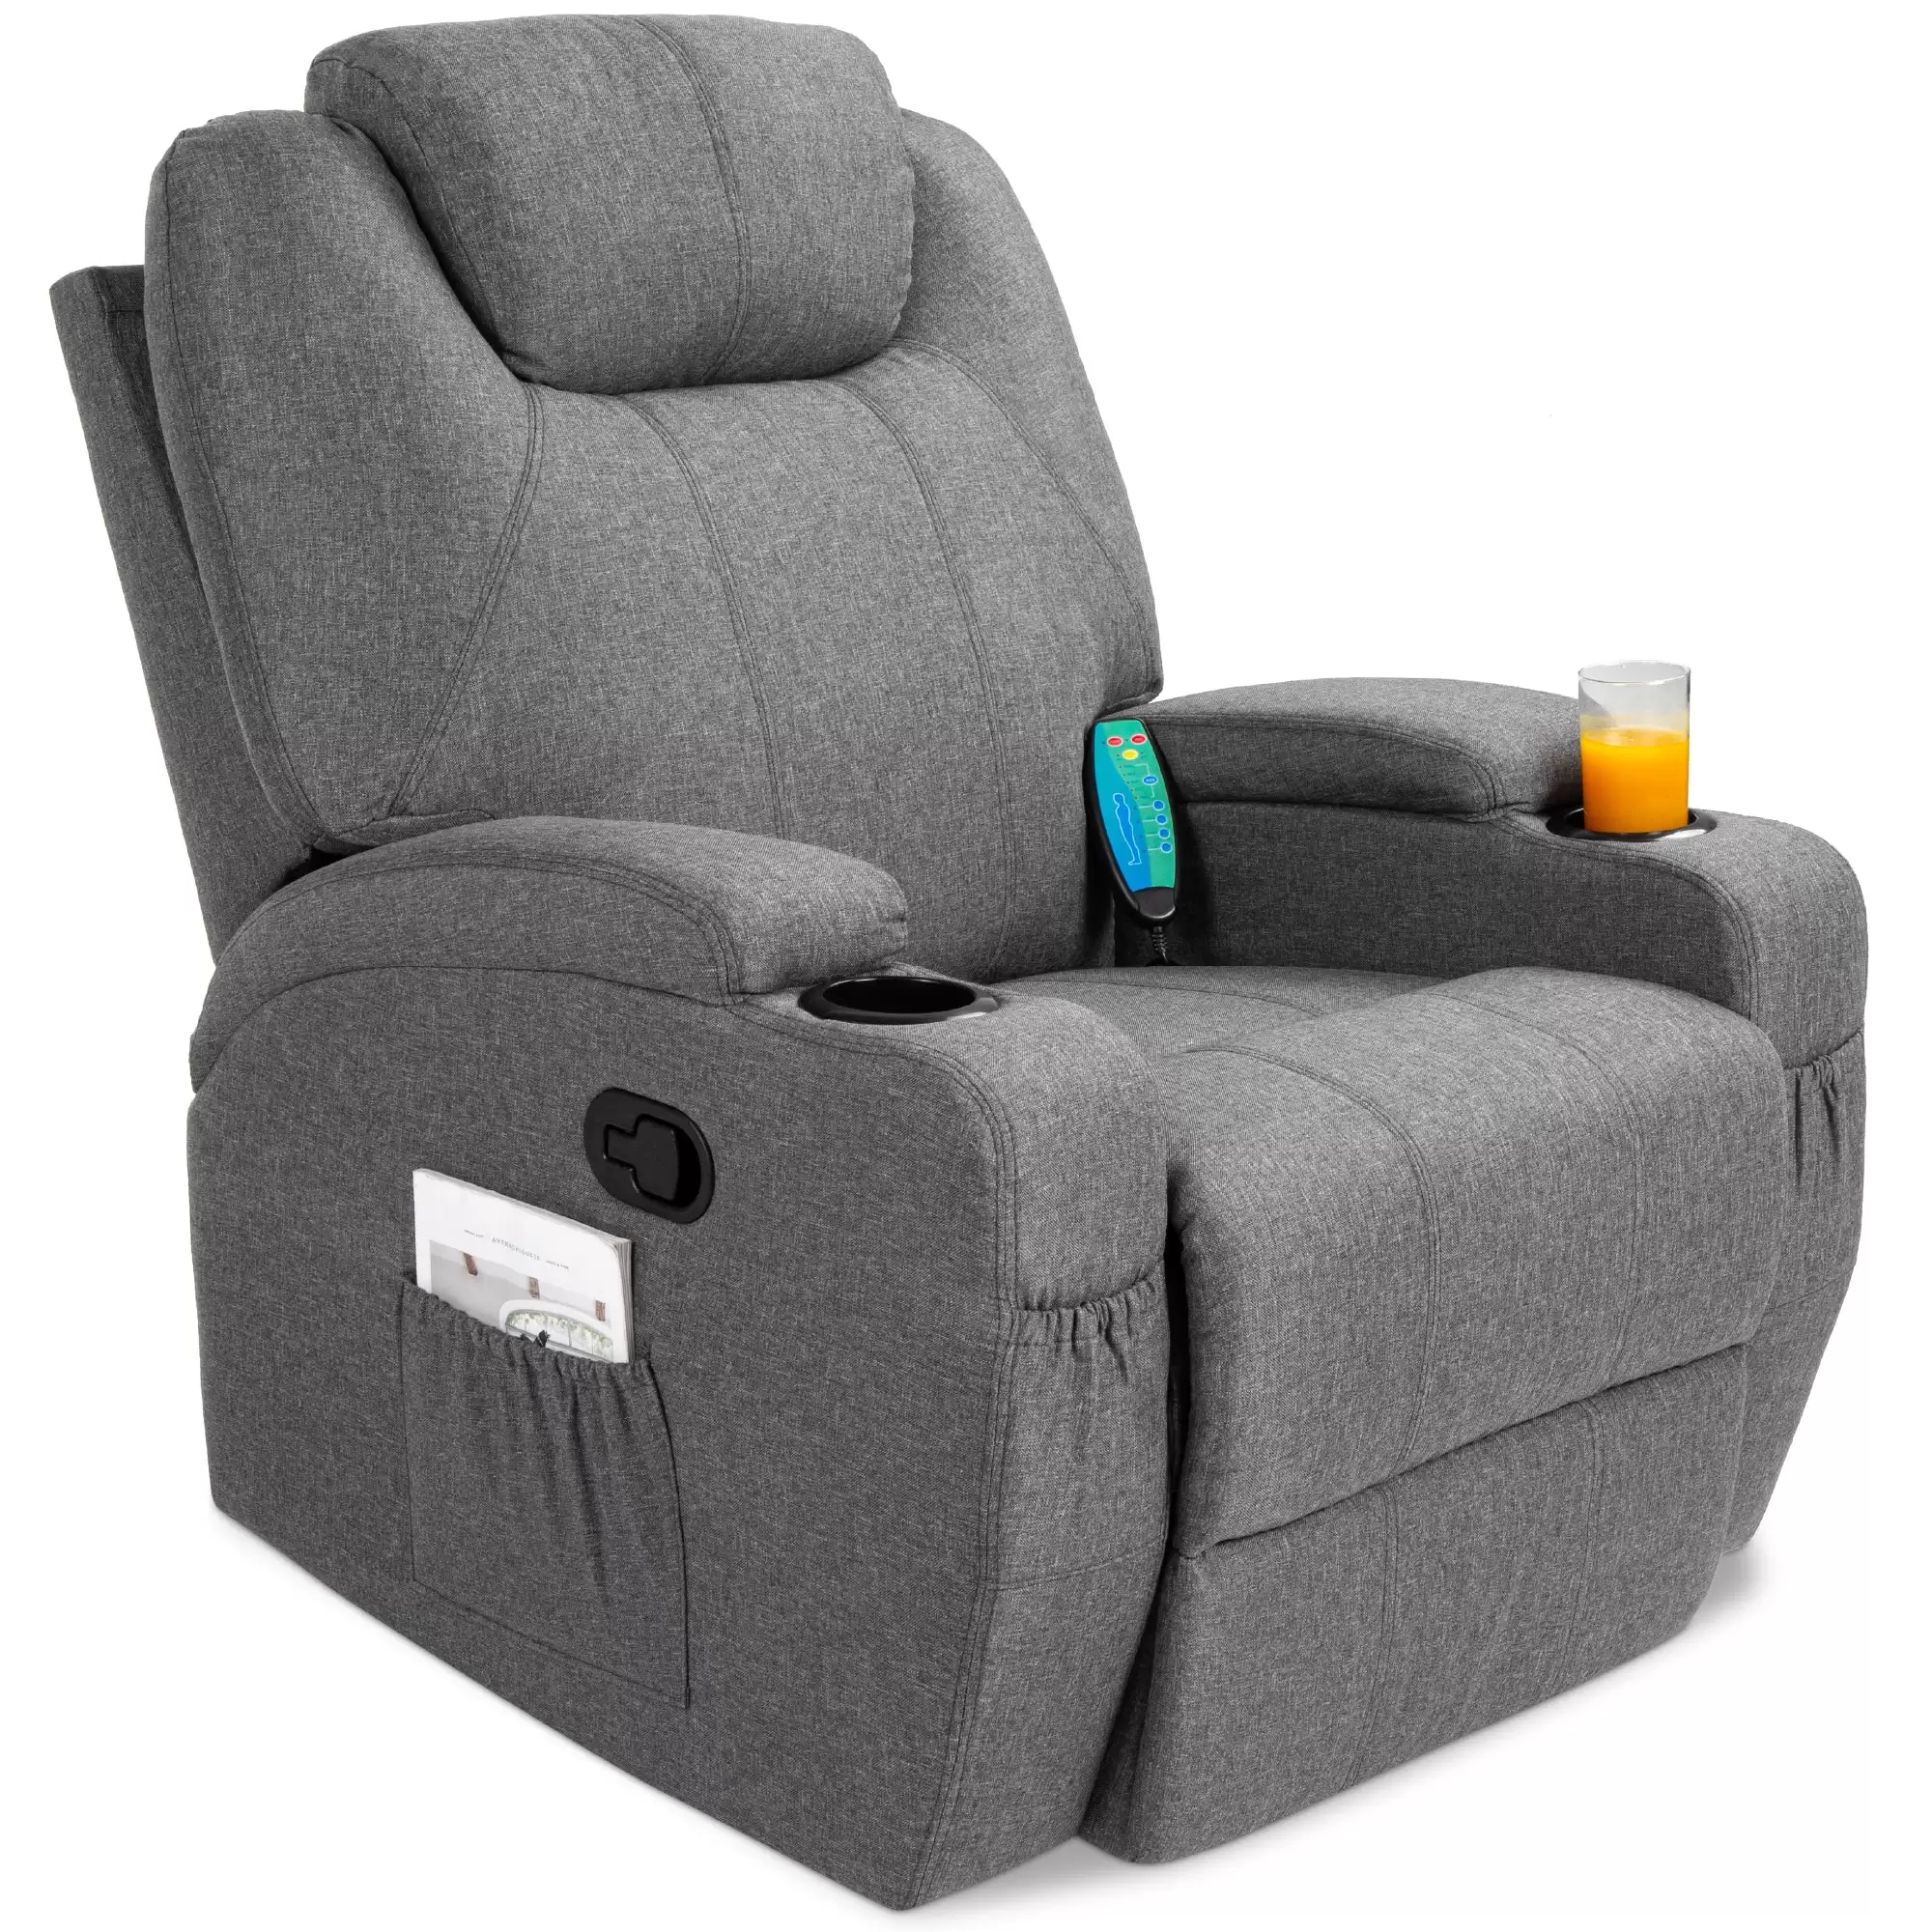 Grab $279.99 Linen Fabric Swivel Massage Recliner Chair W/ Remote Control With This Bestchoiceproducts Discount Voucher